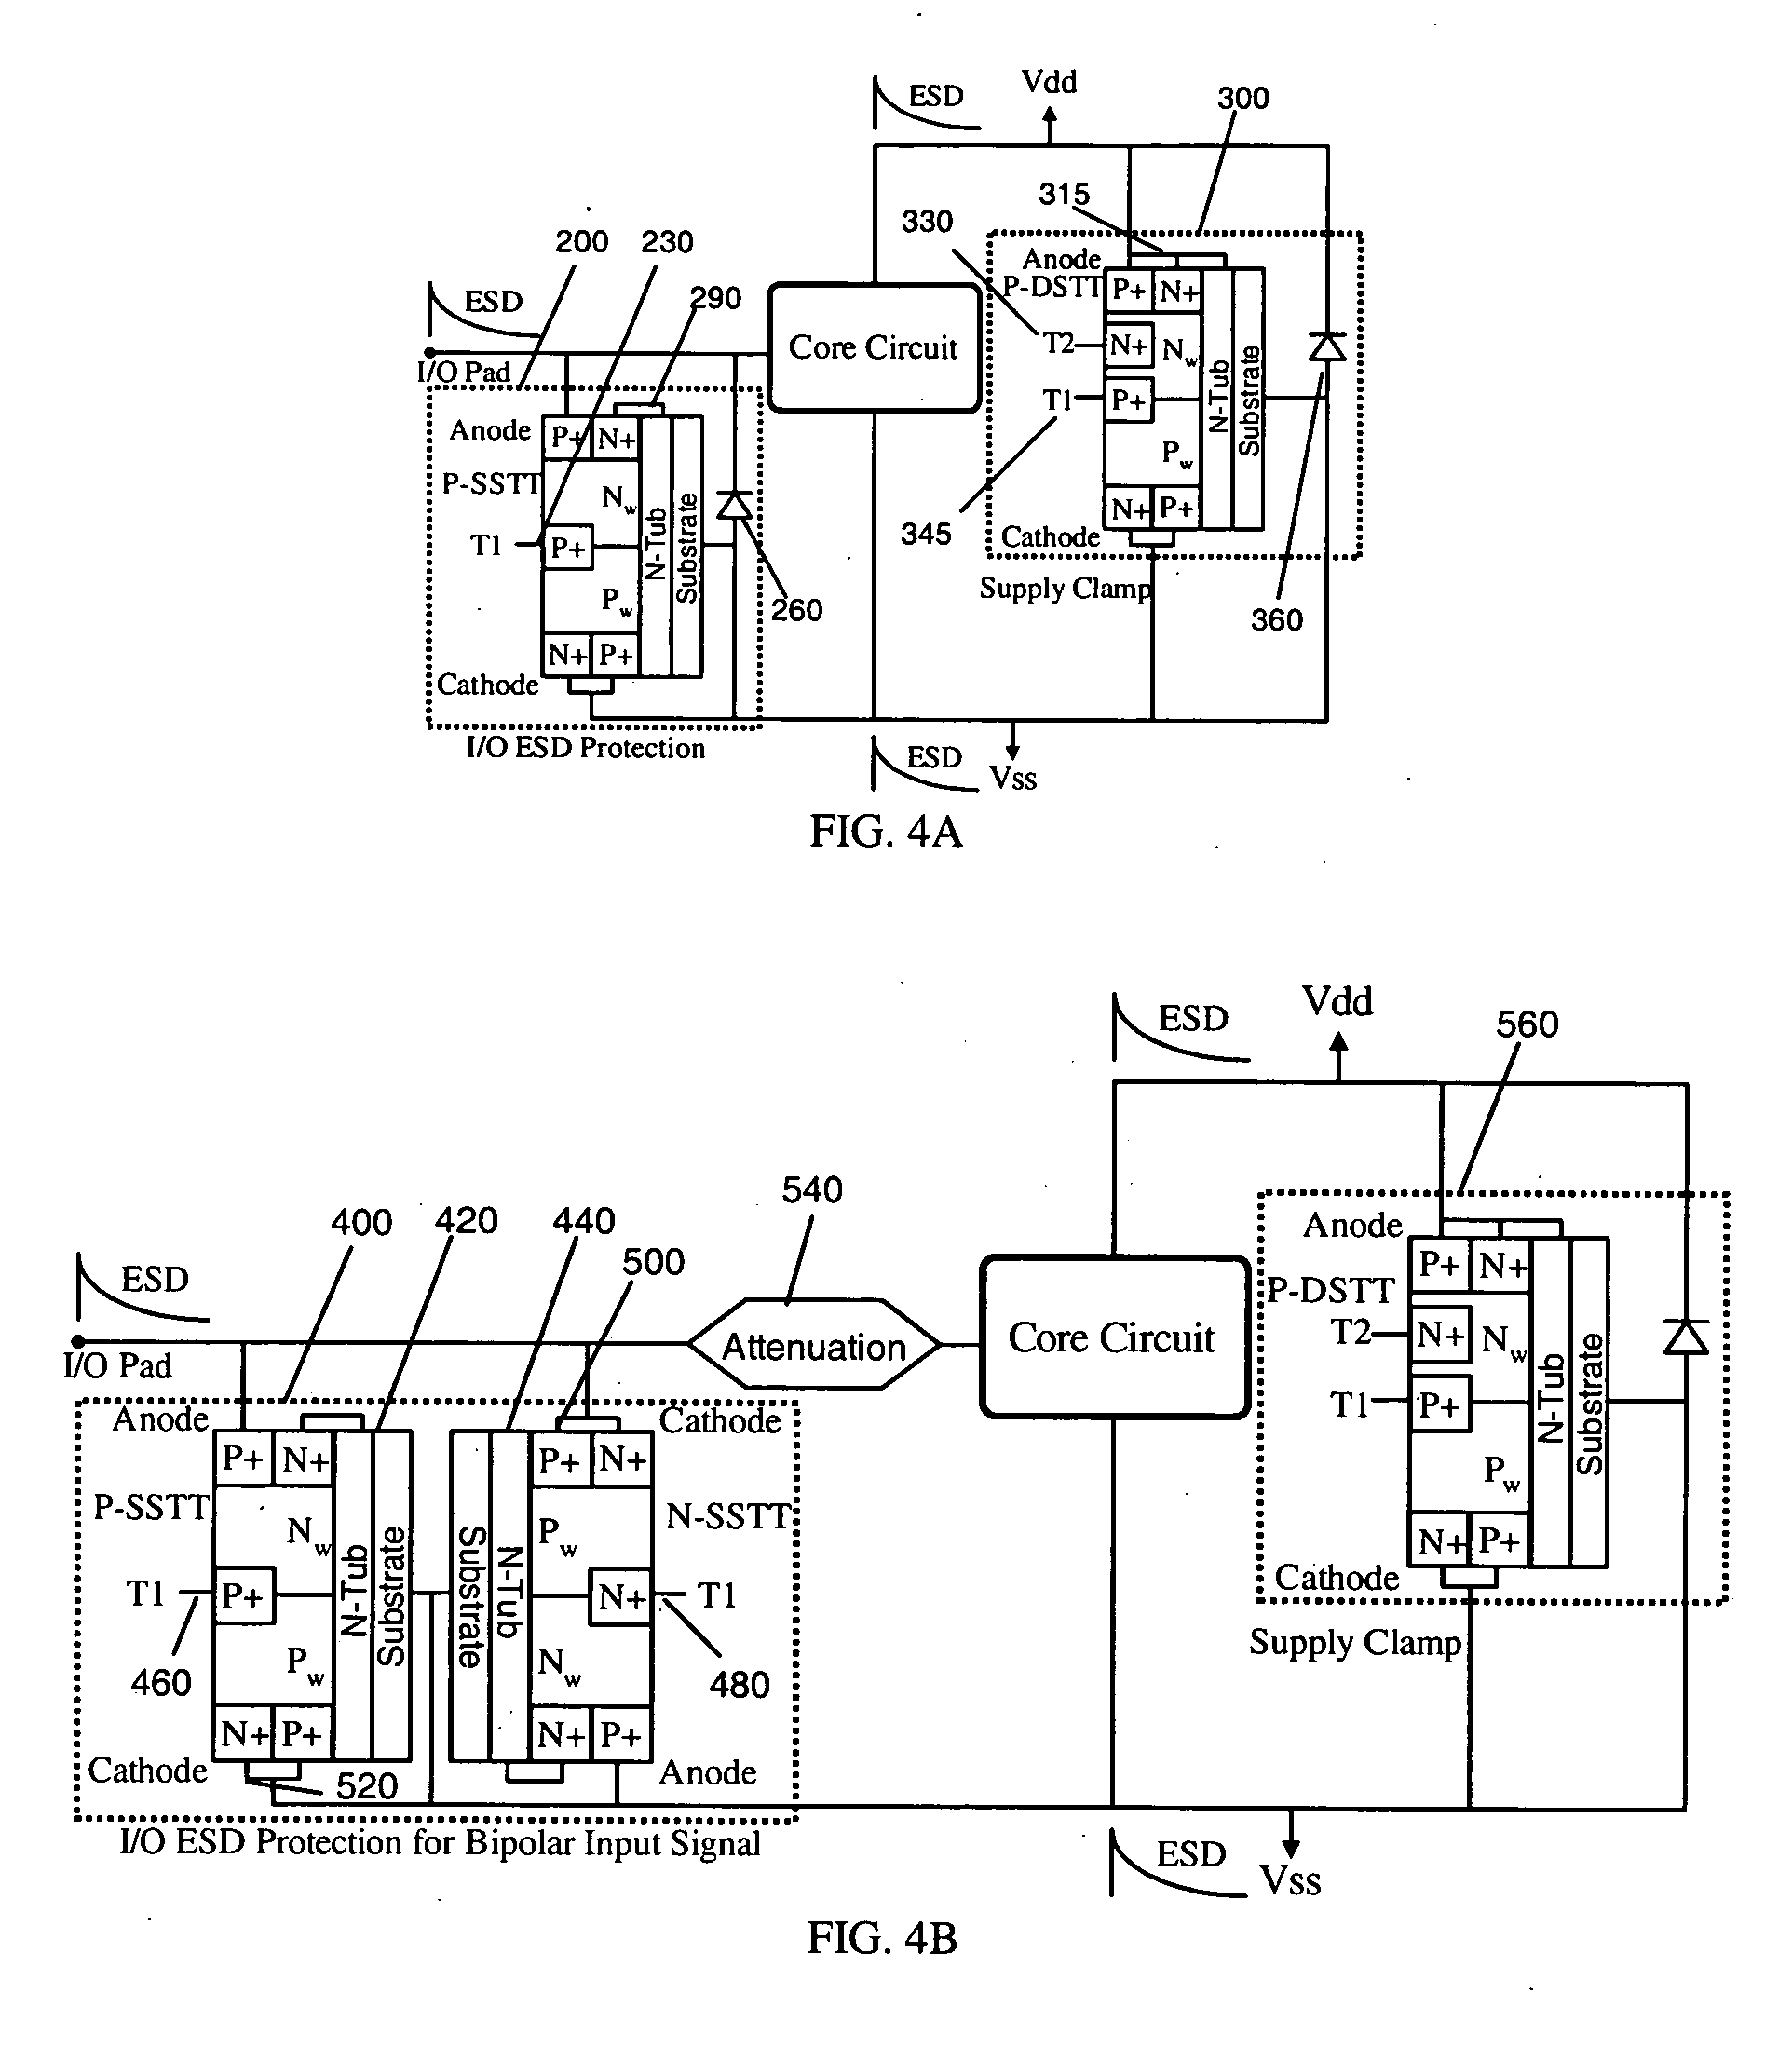 Electrostatic discharge protection device for digital circuits and for applications with input/output bipolar voltage much higher than the core circuit power supply